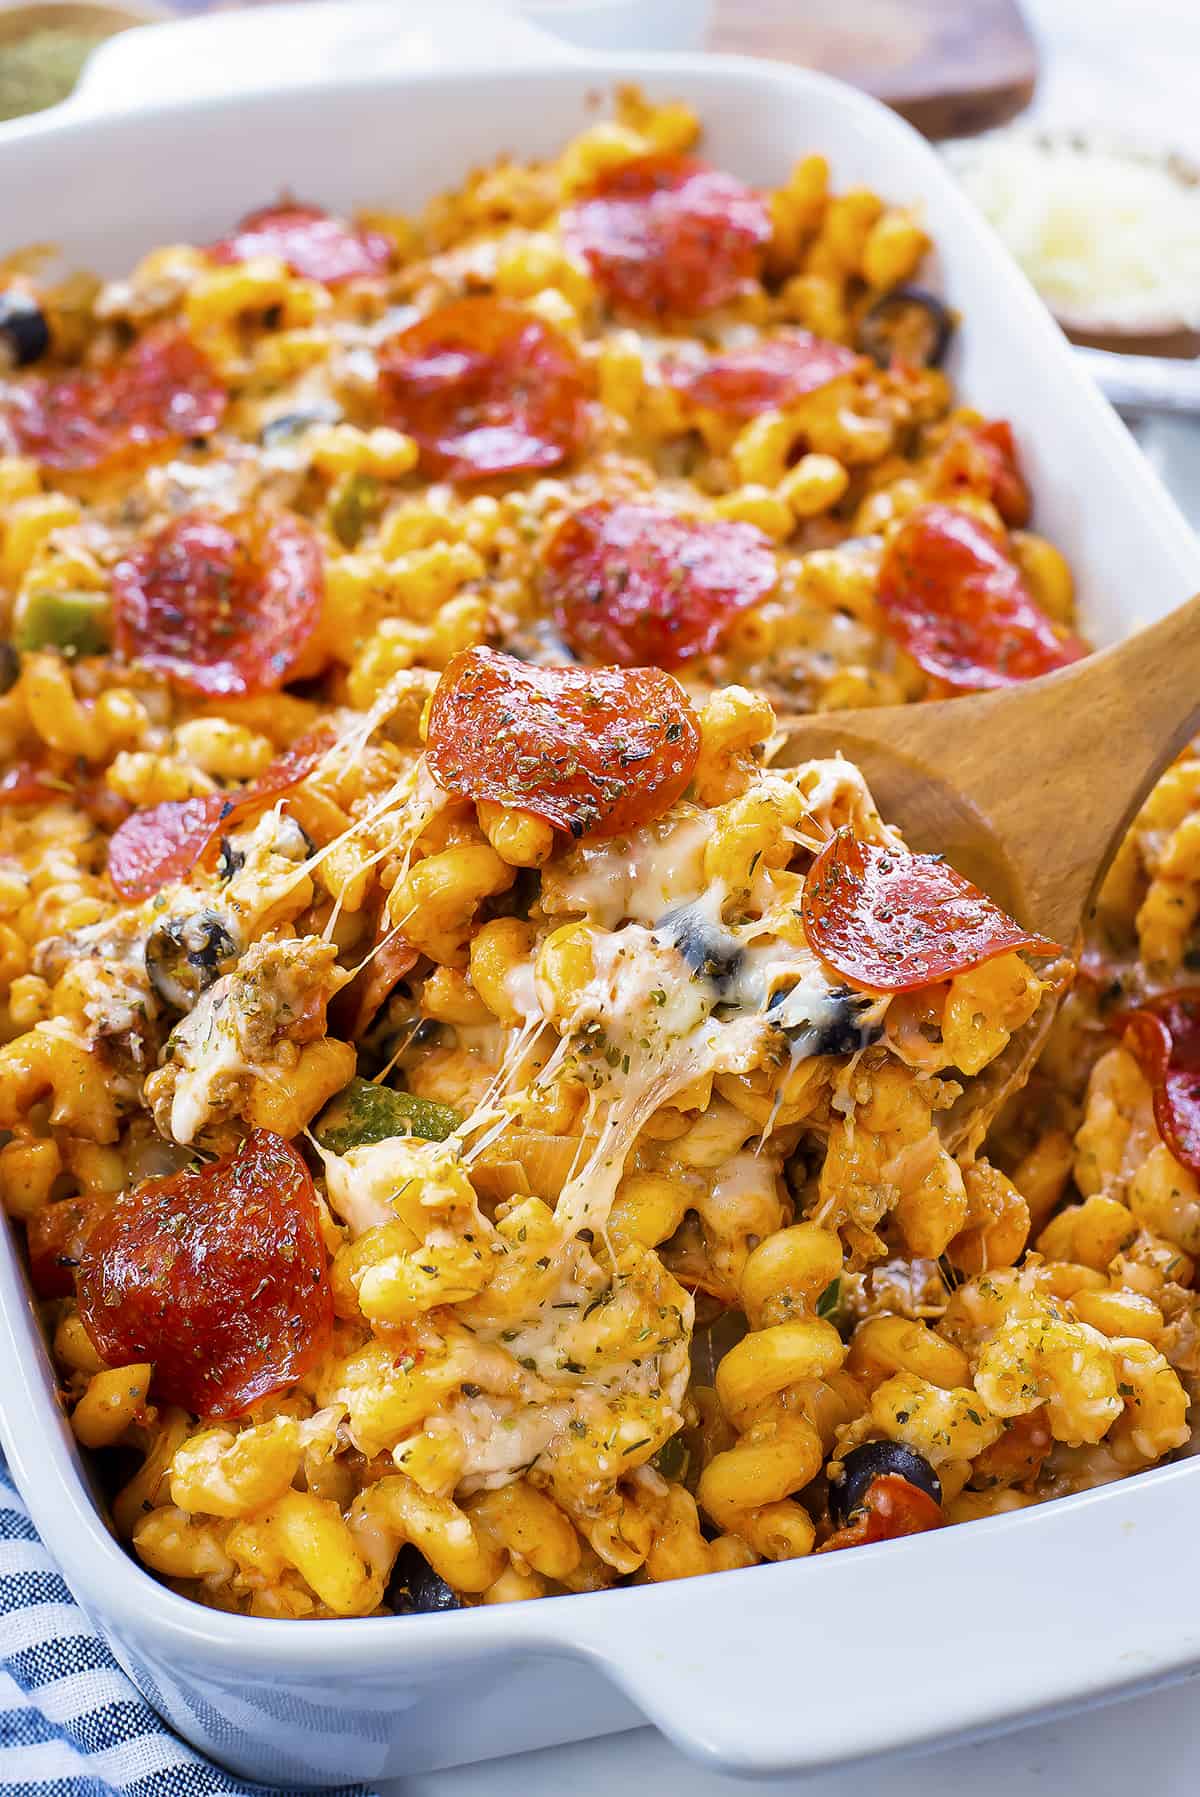 Baked cheesy pizza pasta in white dish.